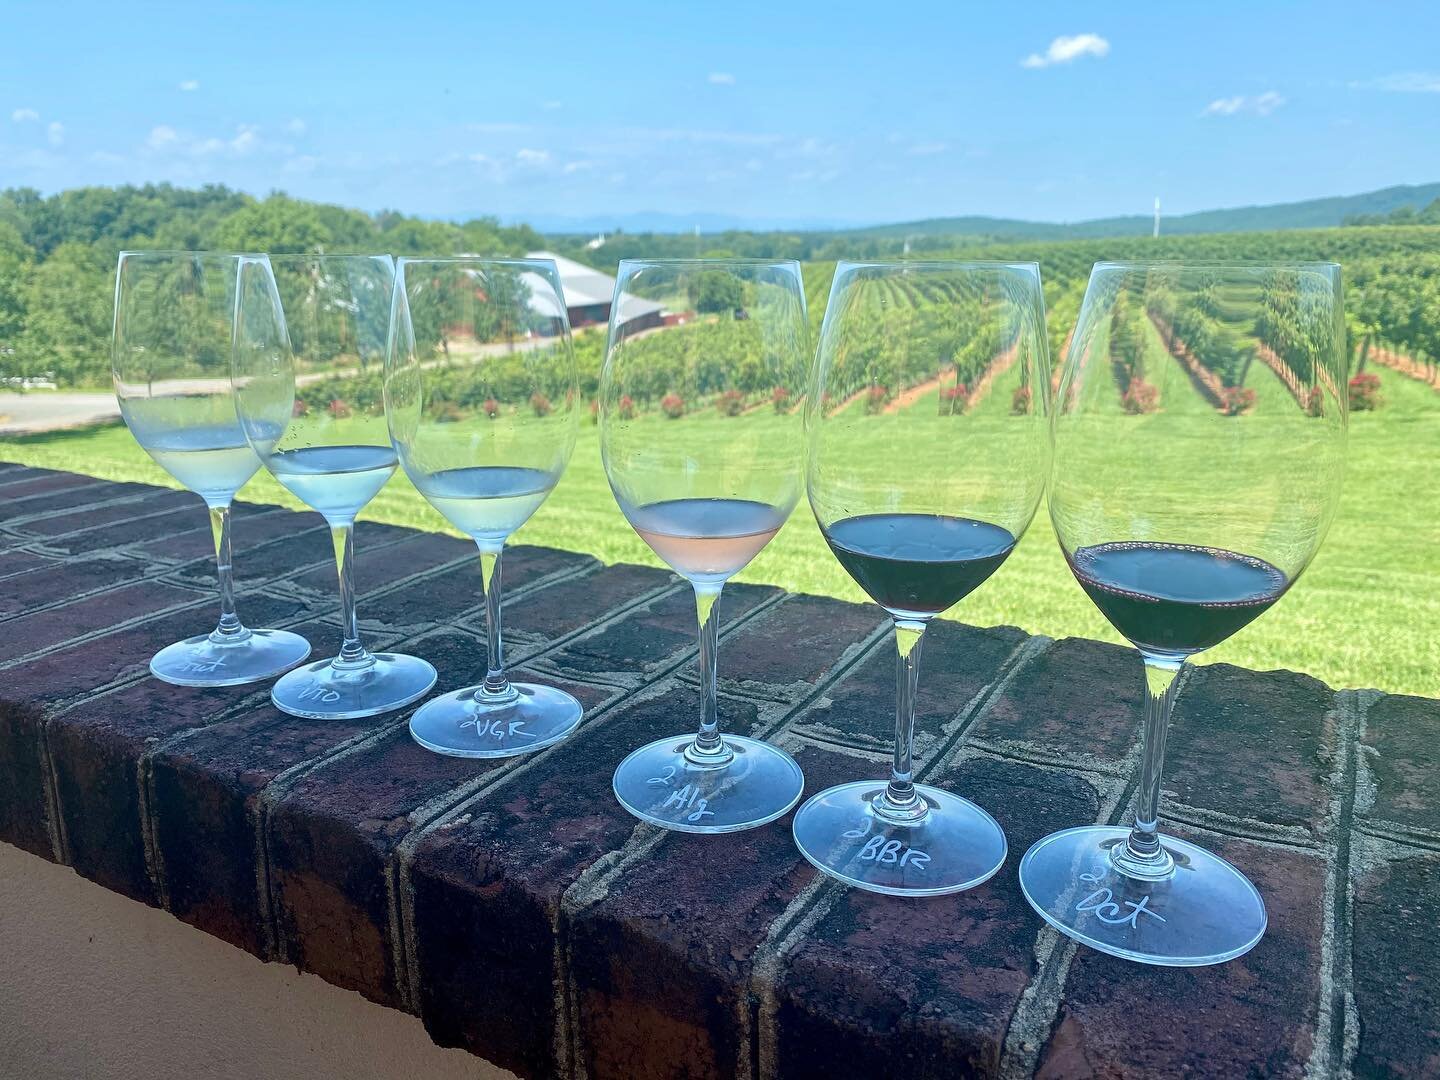 Thanks again to @barboursville and @themoderngent for setting us up with a fantastic afternoon at The Library. Beautiful view, tasty victuals, and of course... the wine. Perfect start to a holiday weekend. #drinklocal #virginiawine #loveva #cheese #c